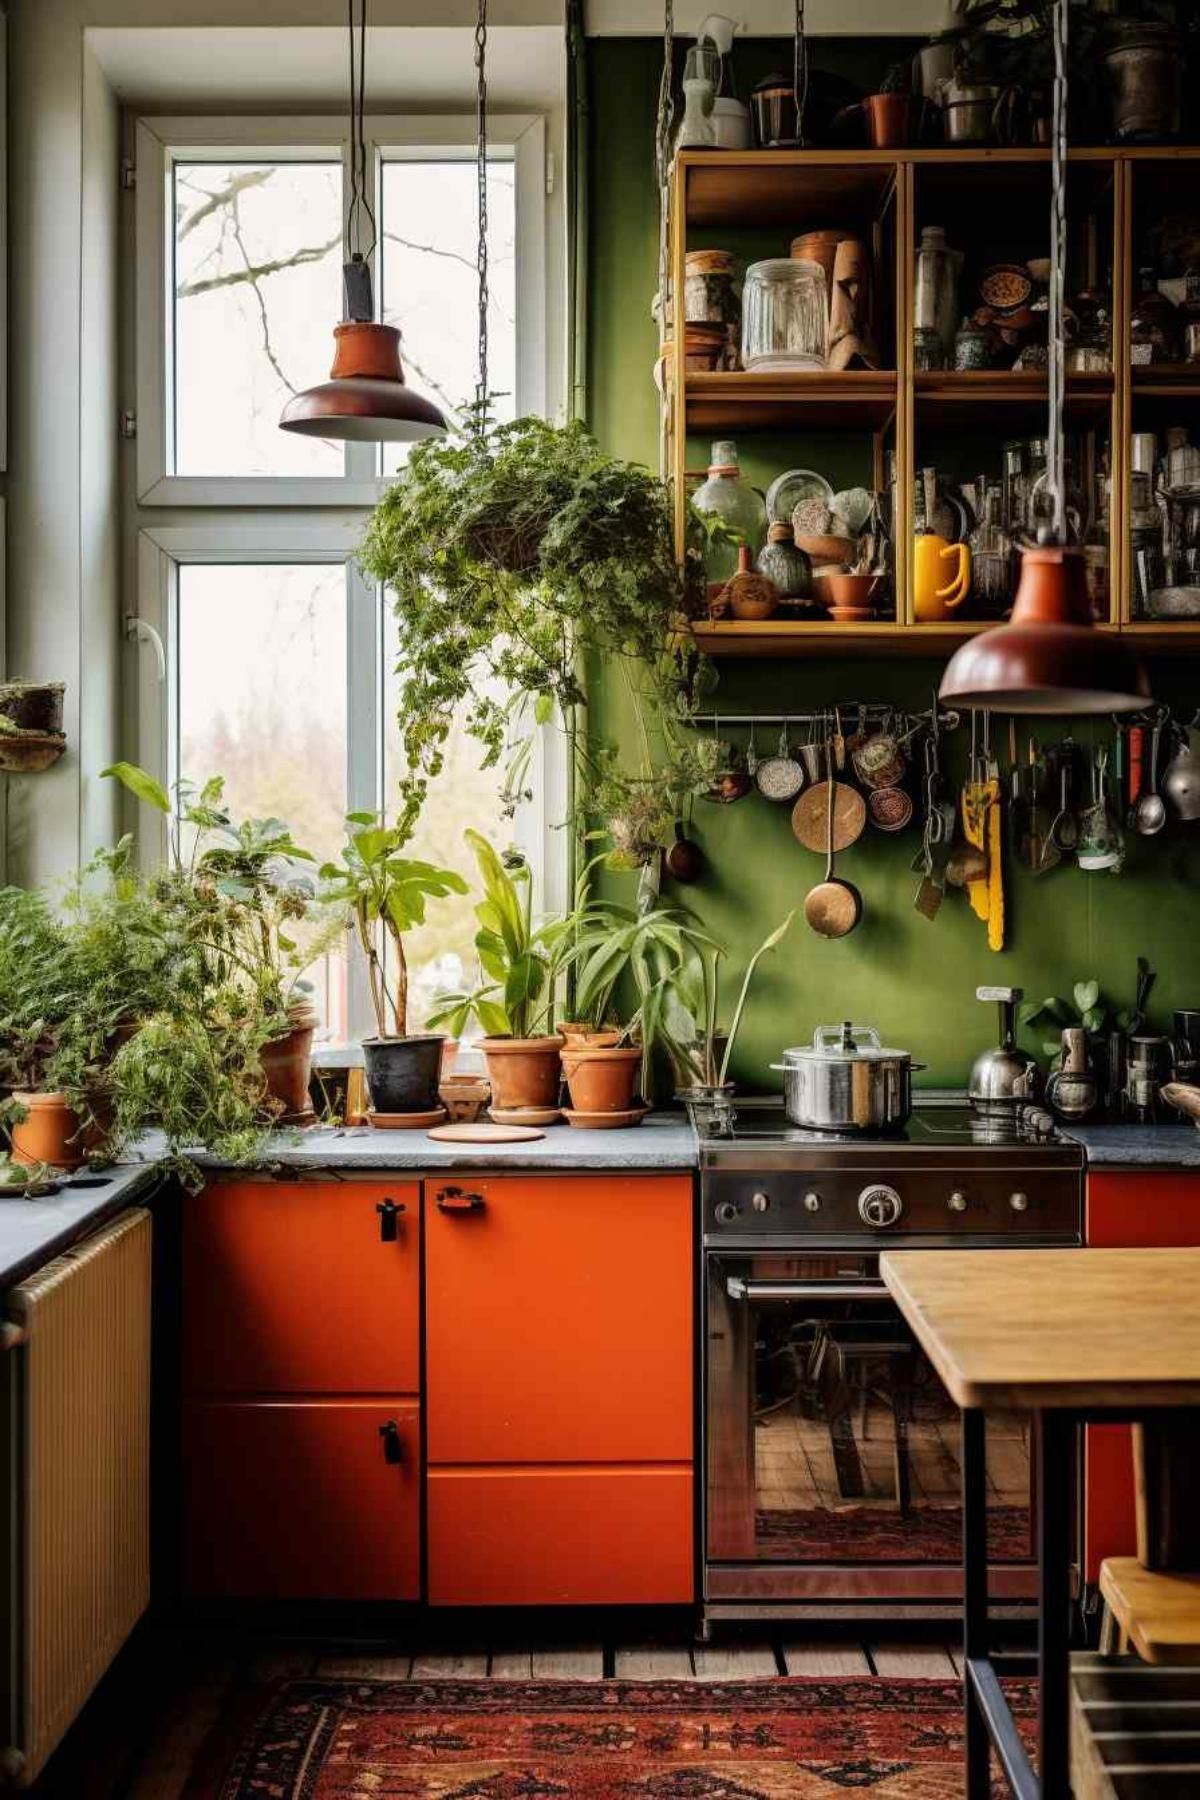 Embrace Boho Chic style in Your Kitchen with These Trendy Ideas